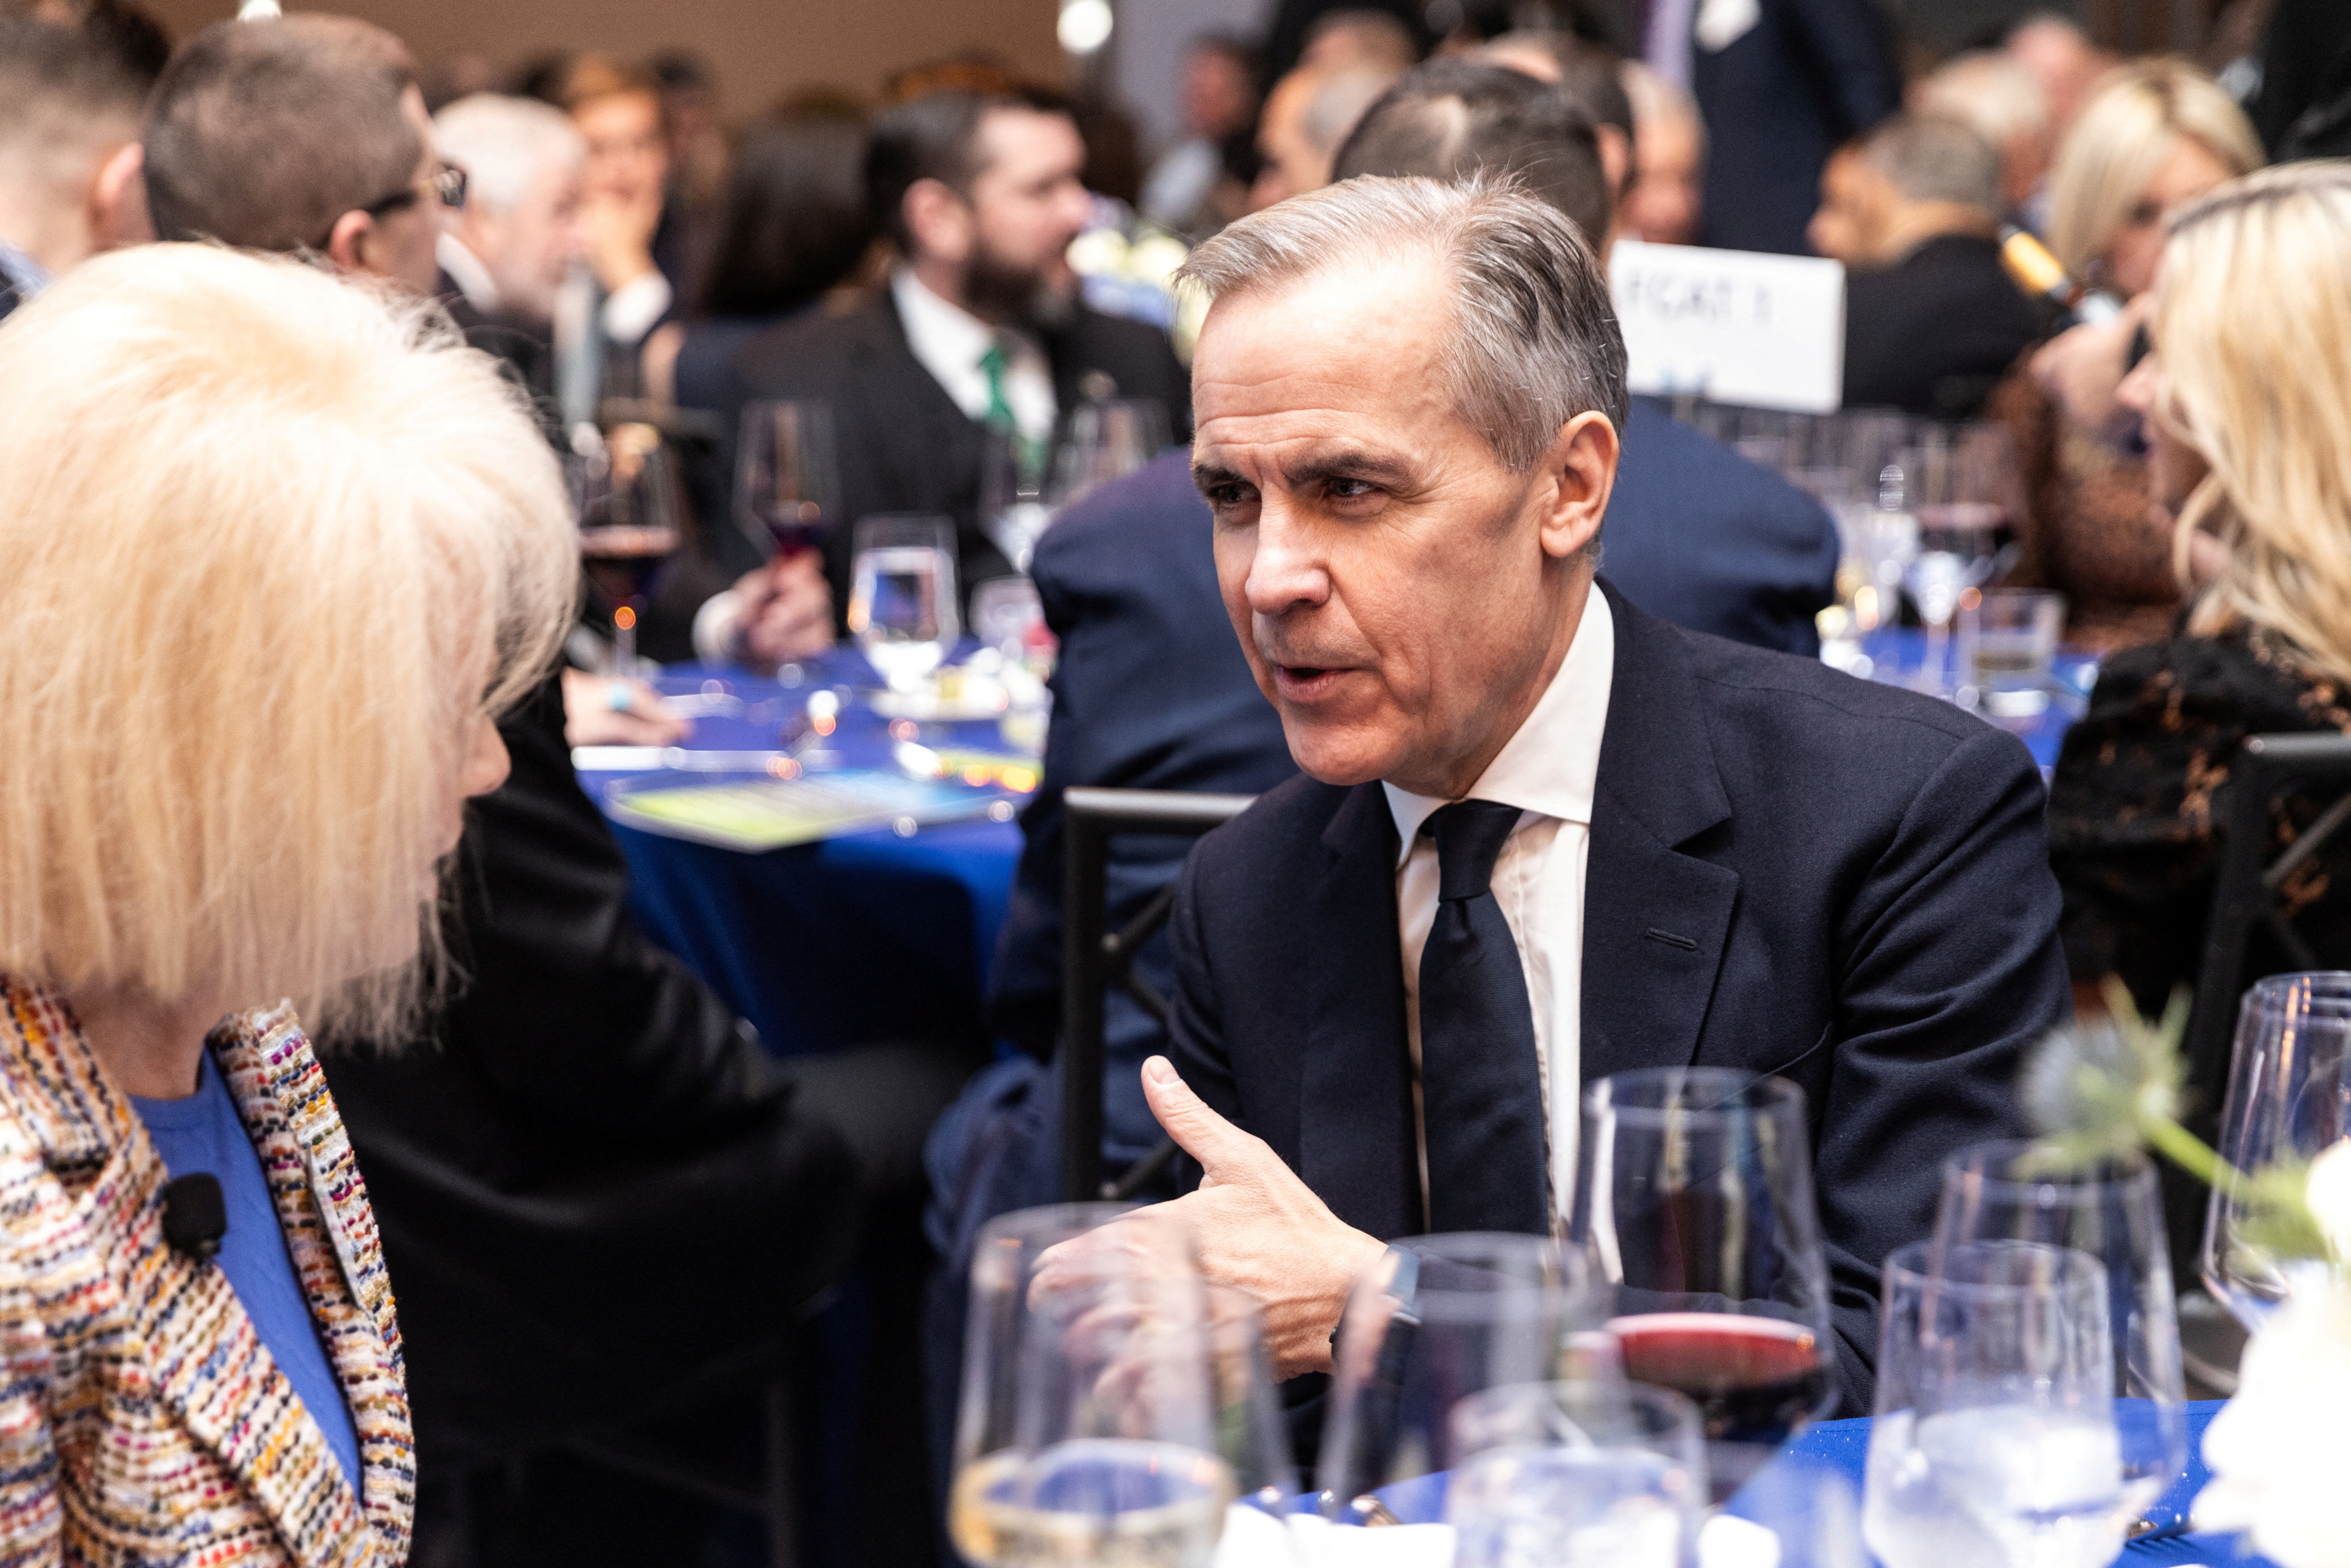 Mark Carney, the UN Special Envoy on Climate Action and Finance attends The Museum of American Finance Gala in New York